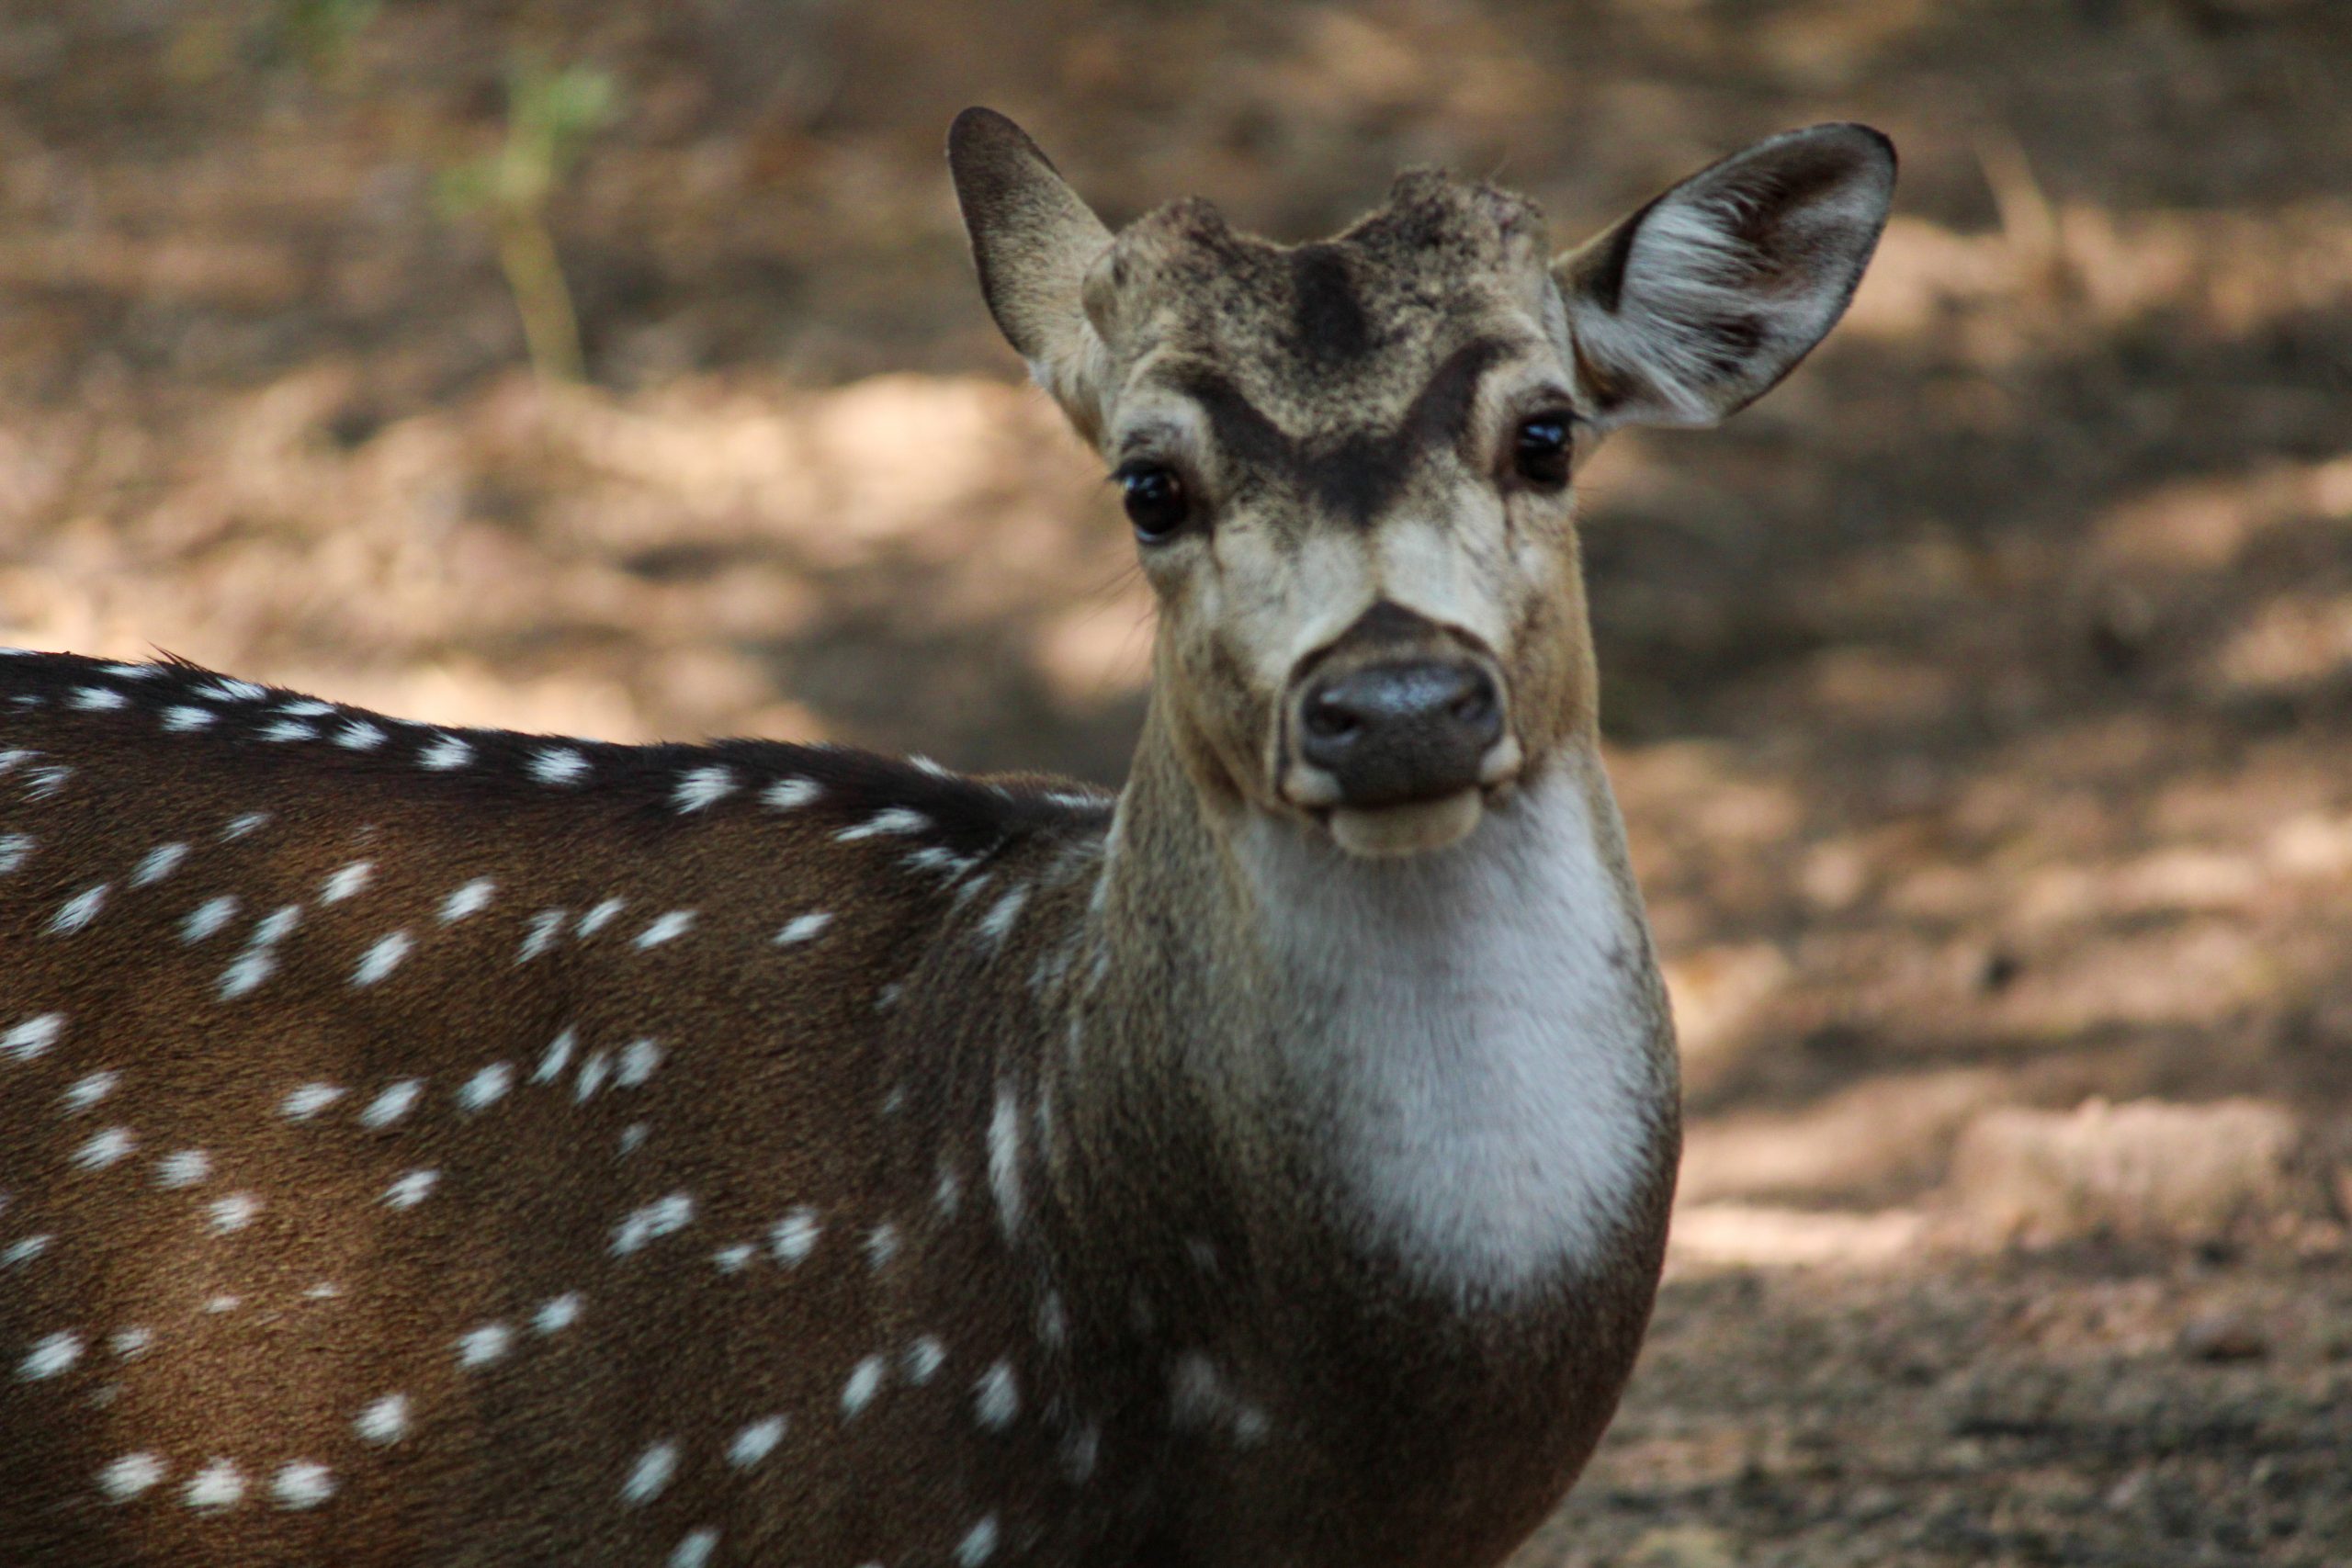 A spotted deer